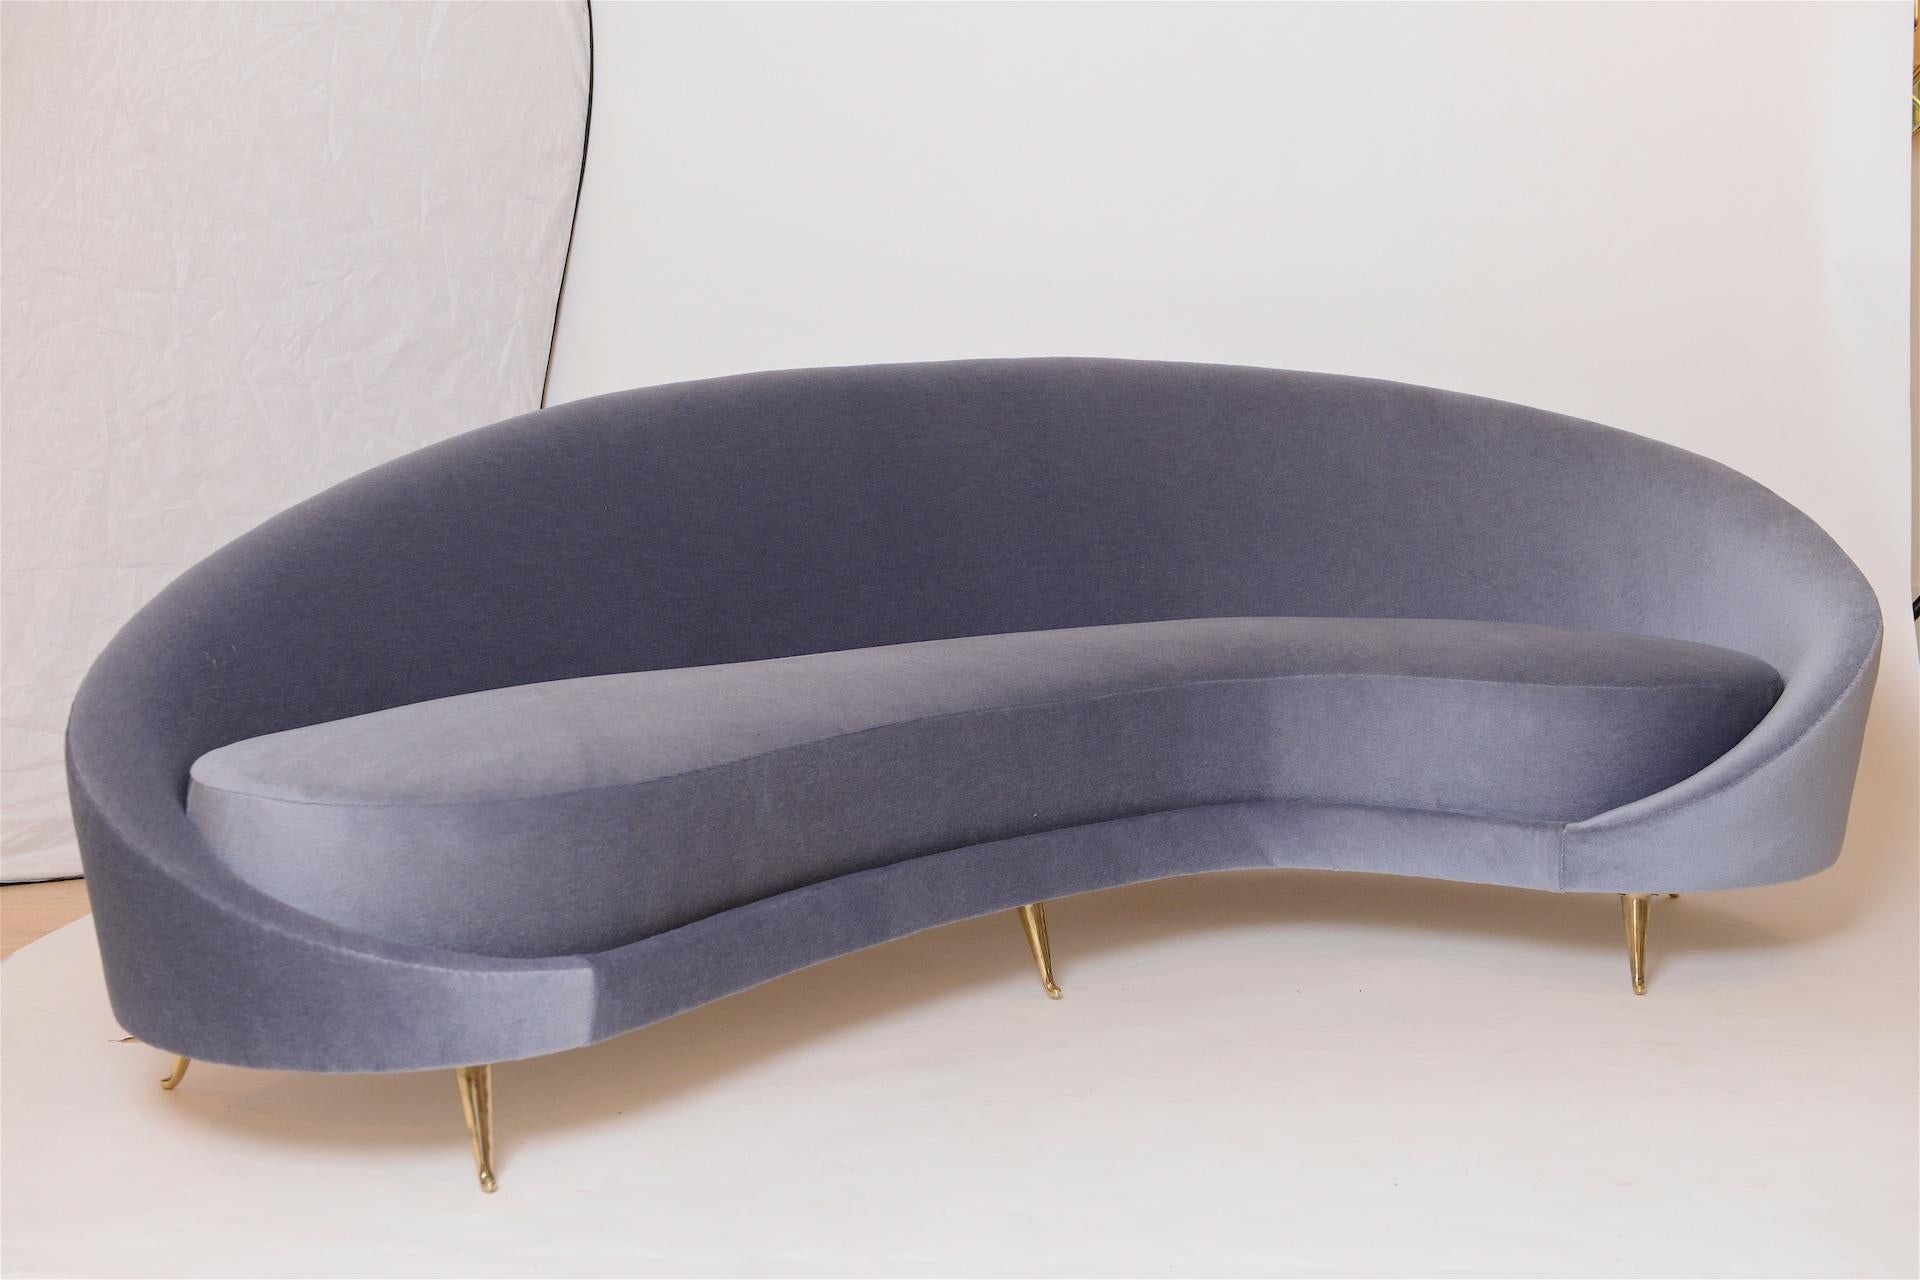 Curved Italian sofa attributed to both Ico Parisi and Frederico Munari, circa 1950

Re upholstered in mohair velvet

Images of this sofa before and during upholstery available. 



    